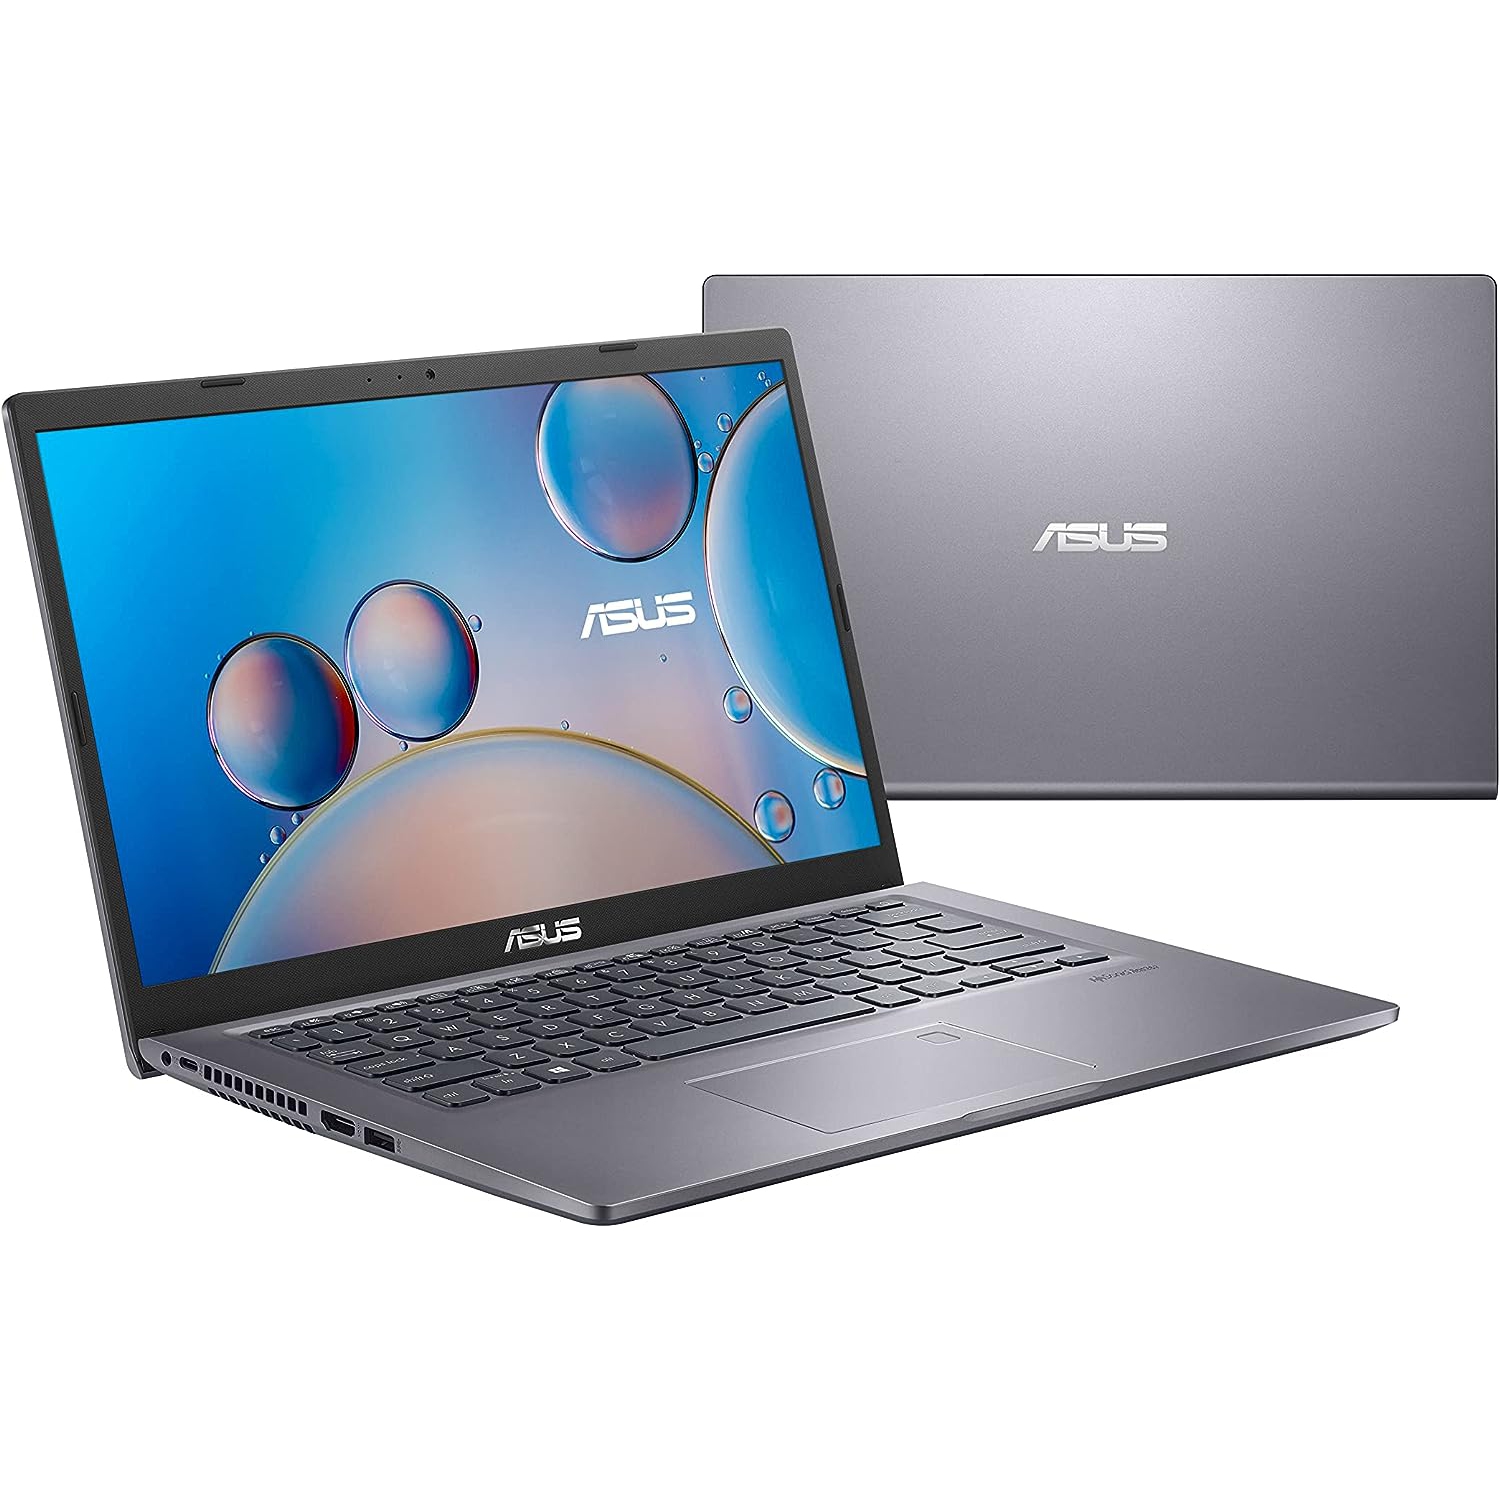 ASUS VivoBook 14 X415 Thin and Light Laptop, 14” FHD Display, Intel Core i3-1005G1 Processor, Intel UHD Graphics, 8GB DDR4 RAM, 128GB PCIe SSD, Windows 11 Home in S Mode.